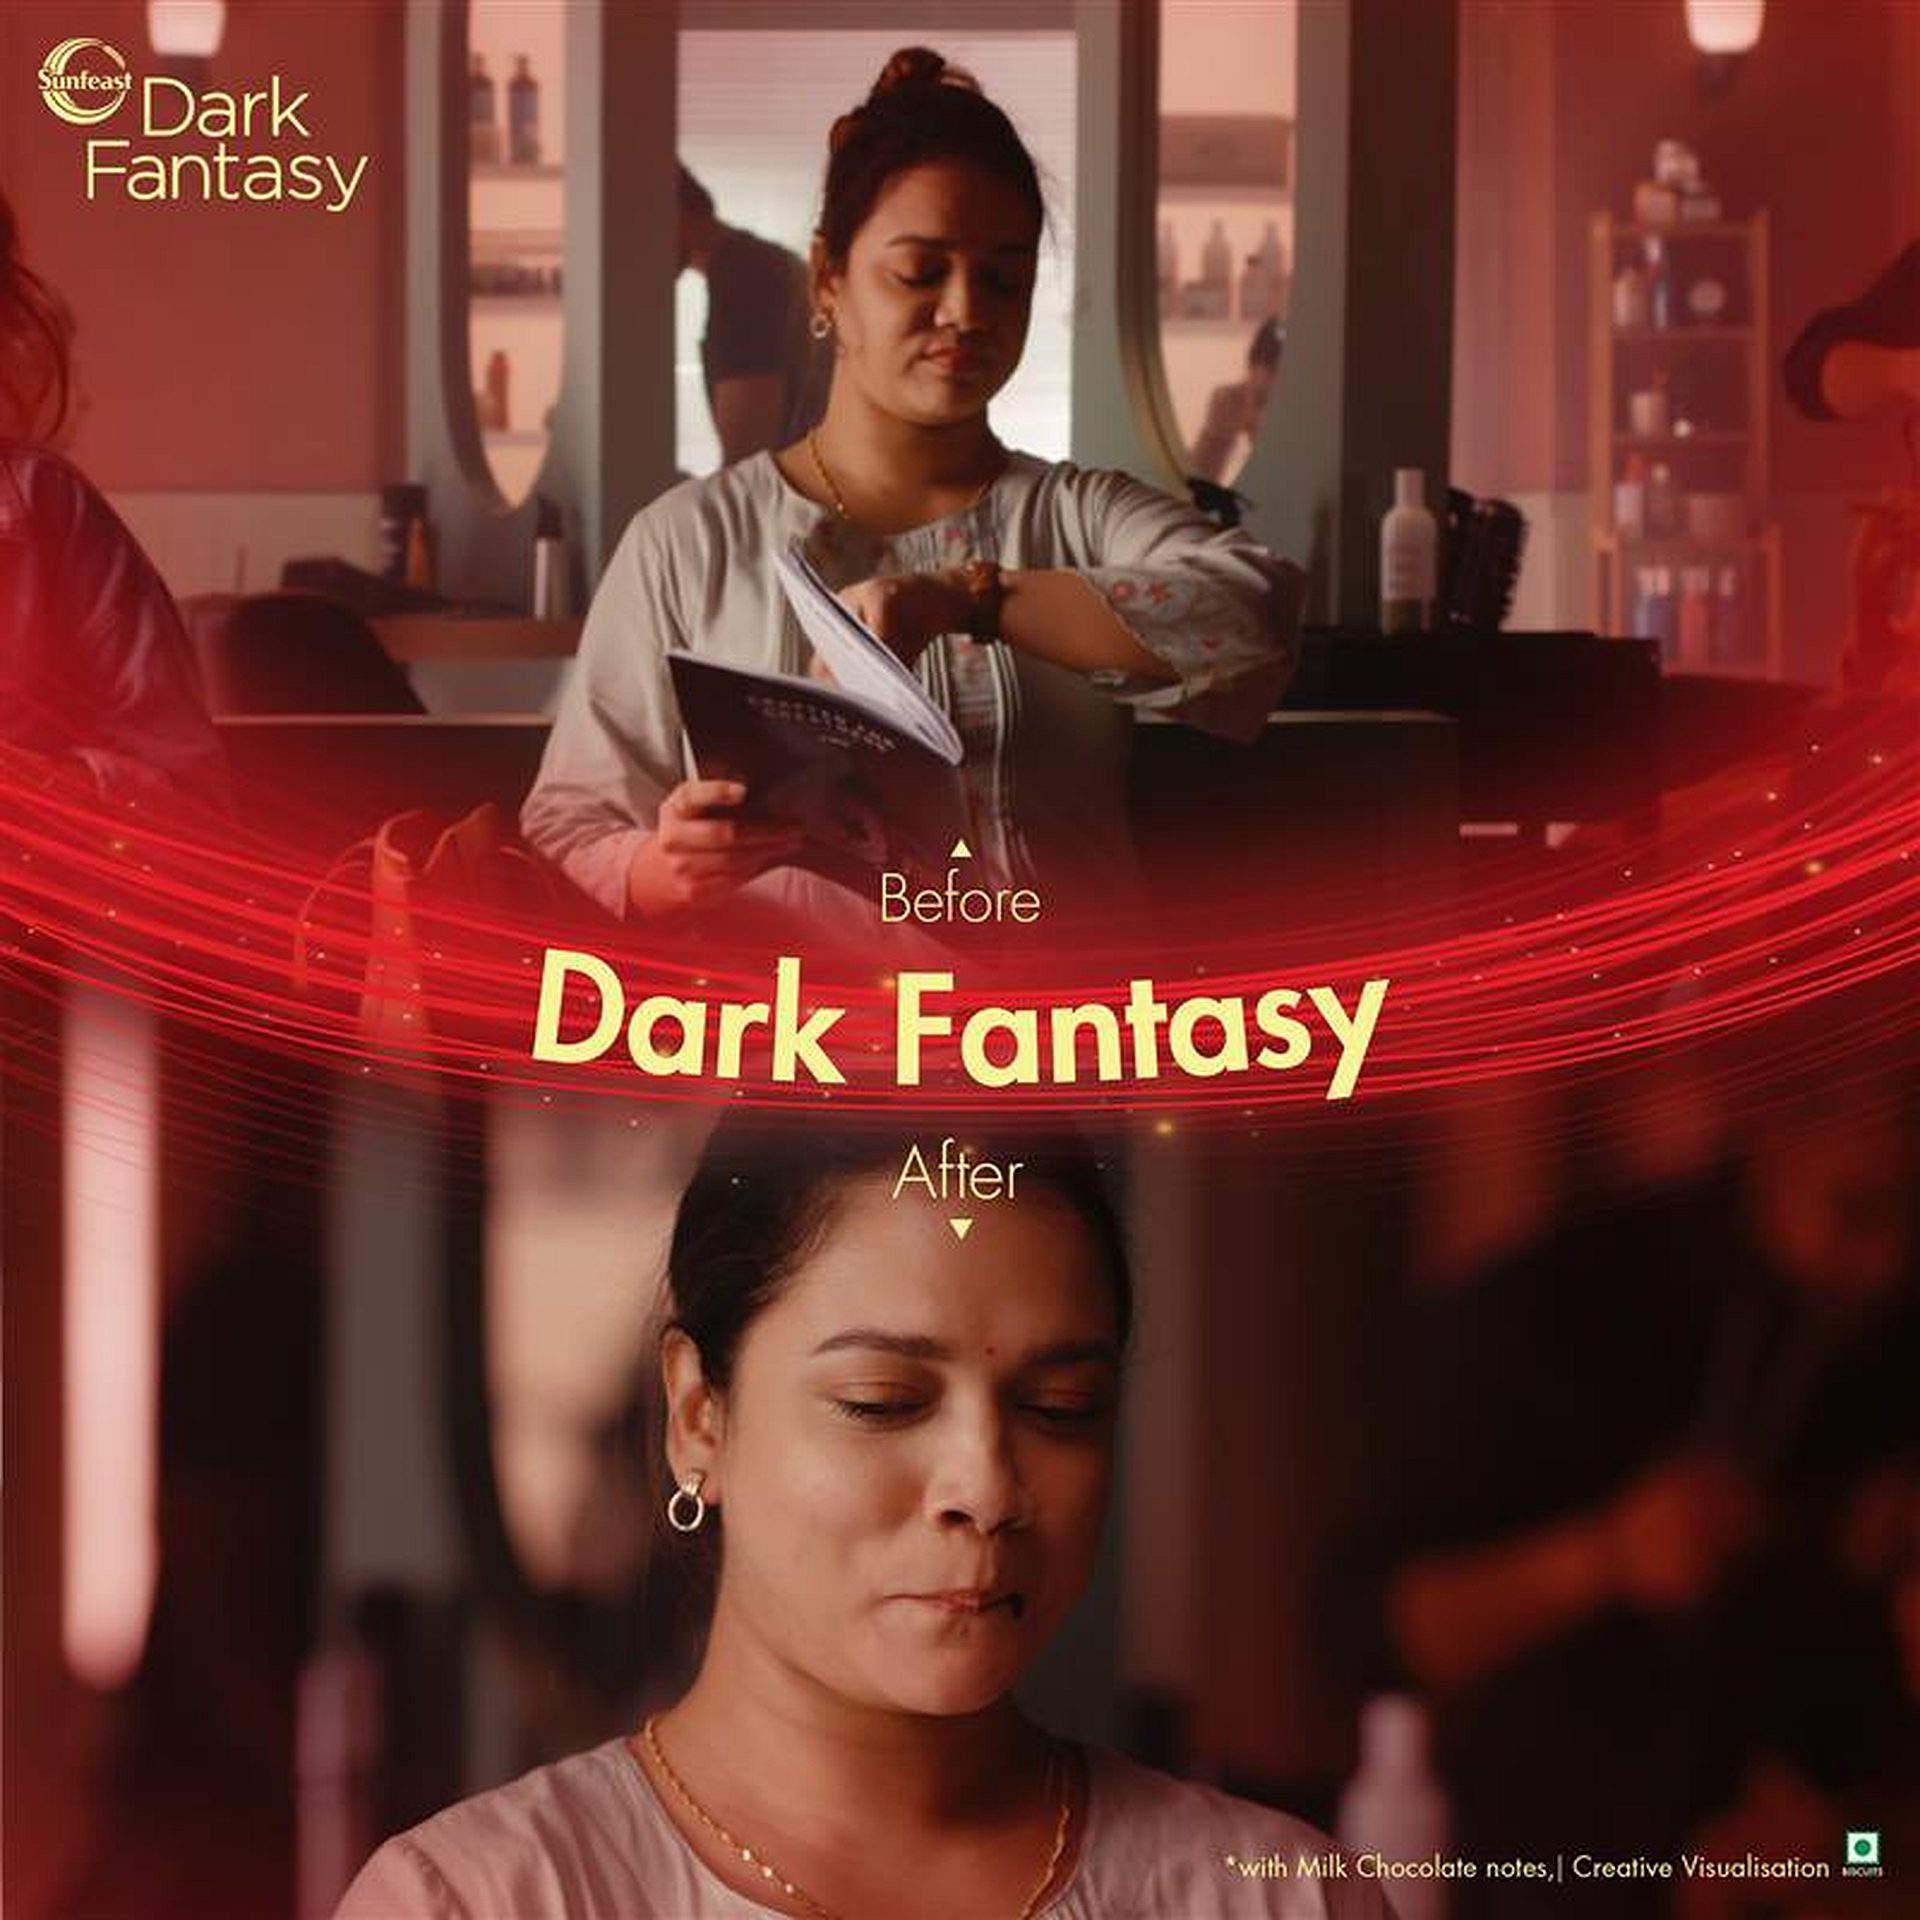 Dark Fantasy ad with SRK explained: GenAI to star alongside Shah Rukh Khan in personalized Dark Fantasy ads. Keep reading and explore now!